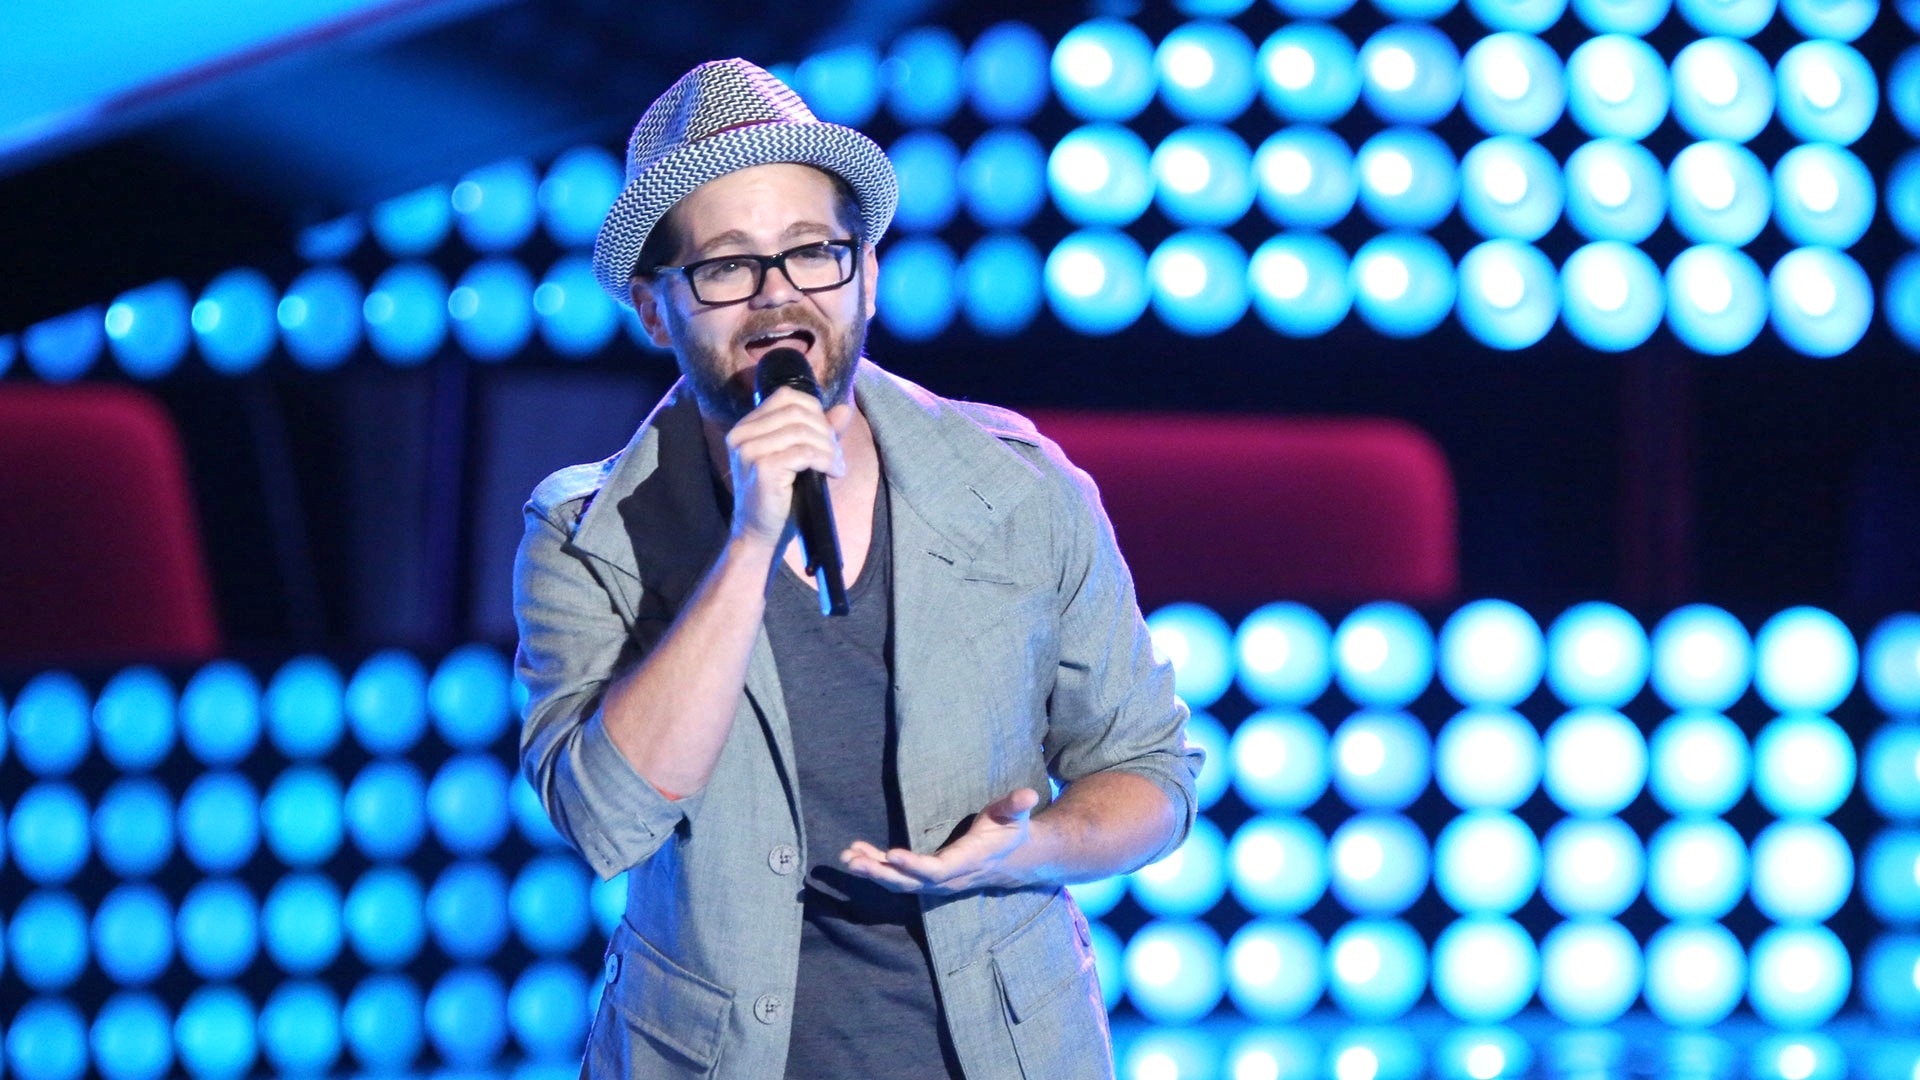 Watch The Voice Highlight Josh Kaufman Audition "One More Try"